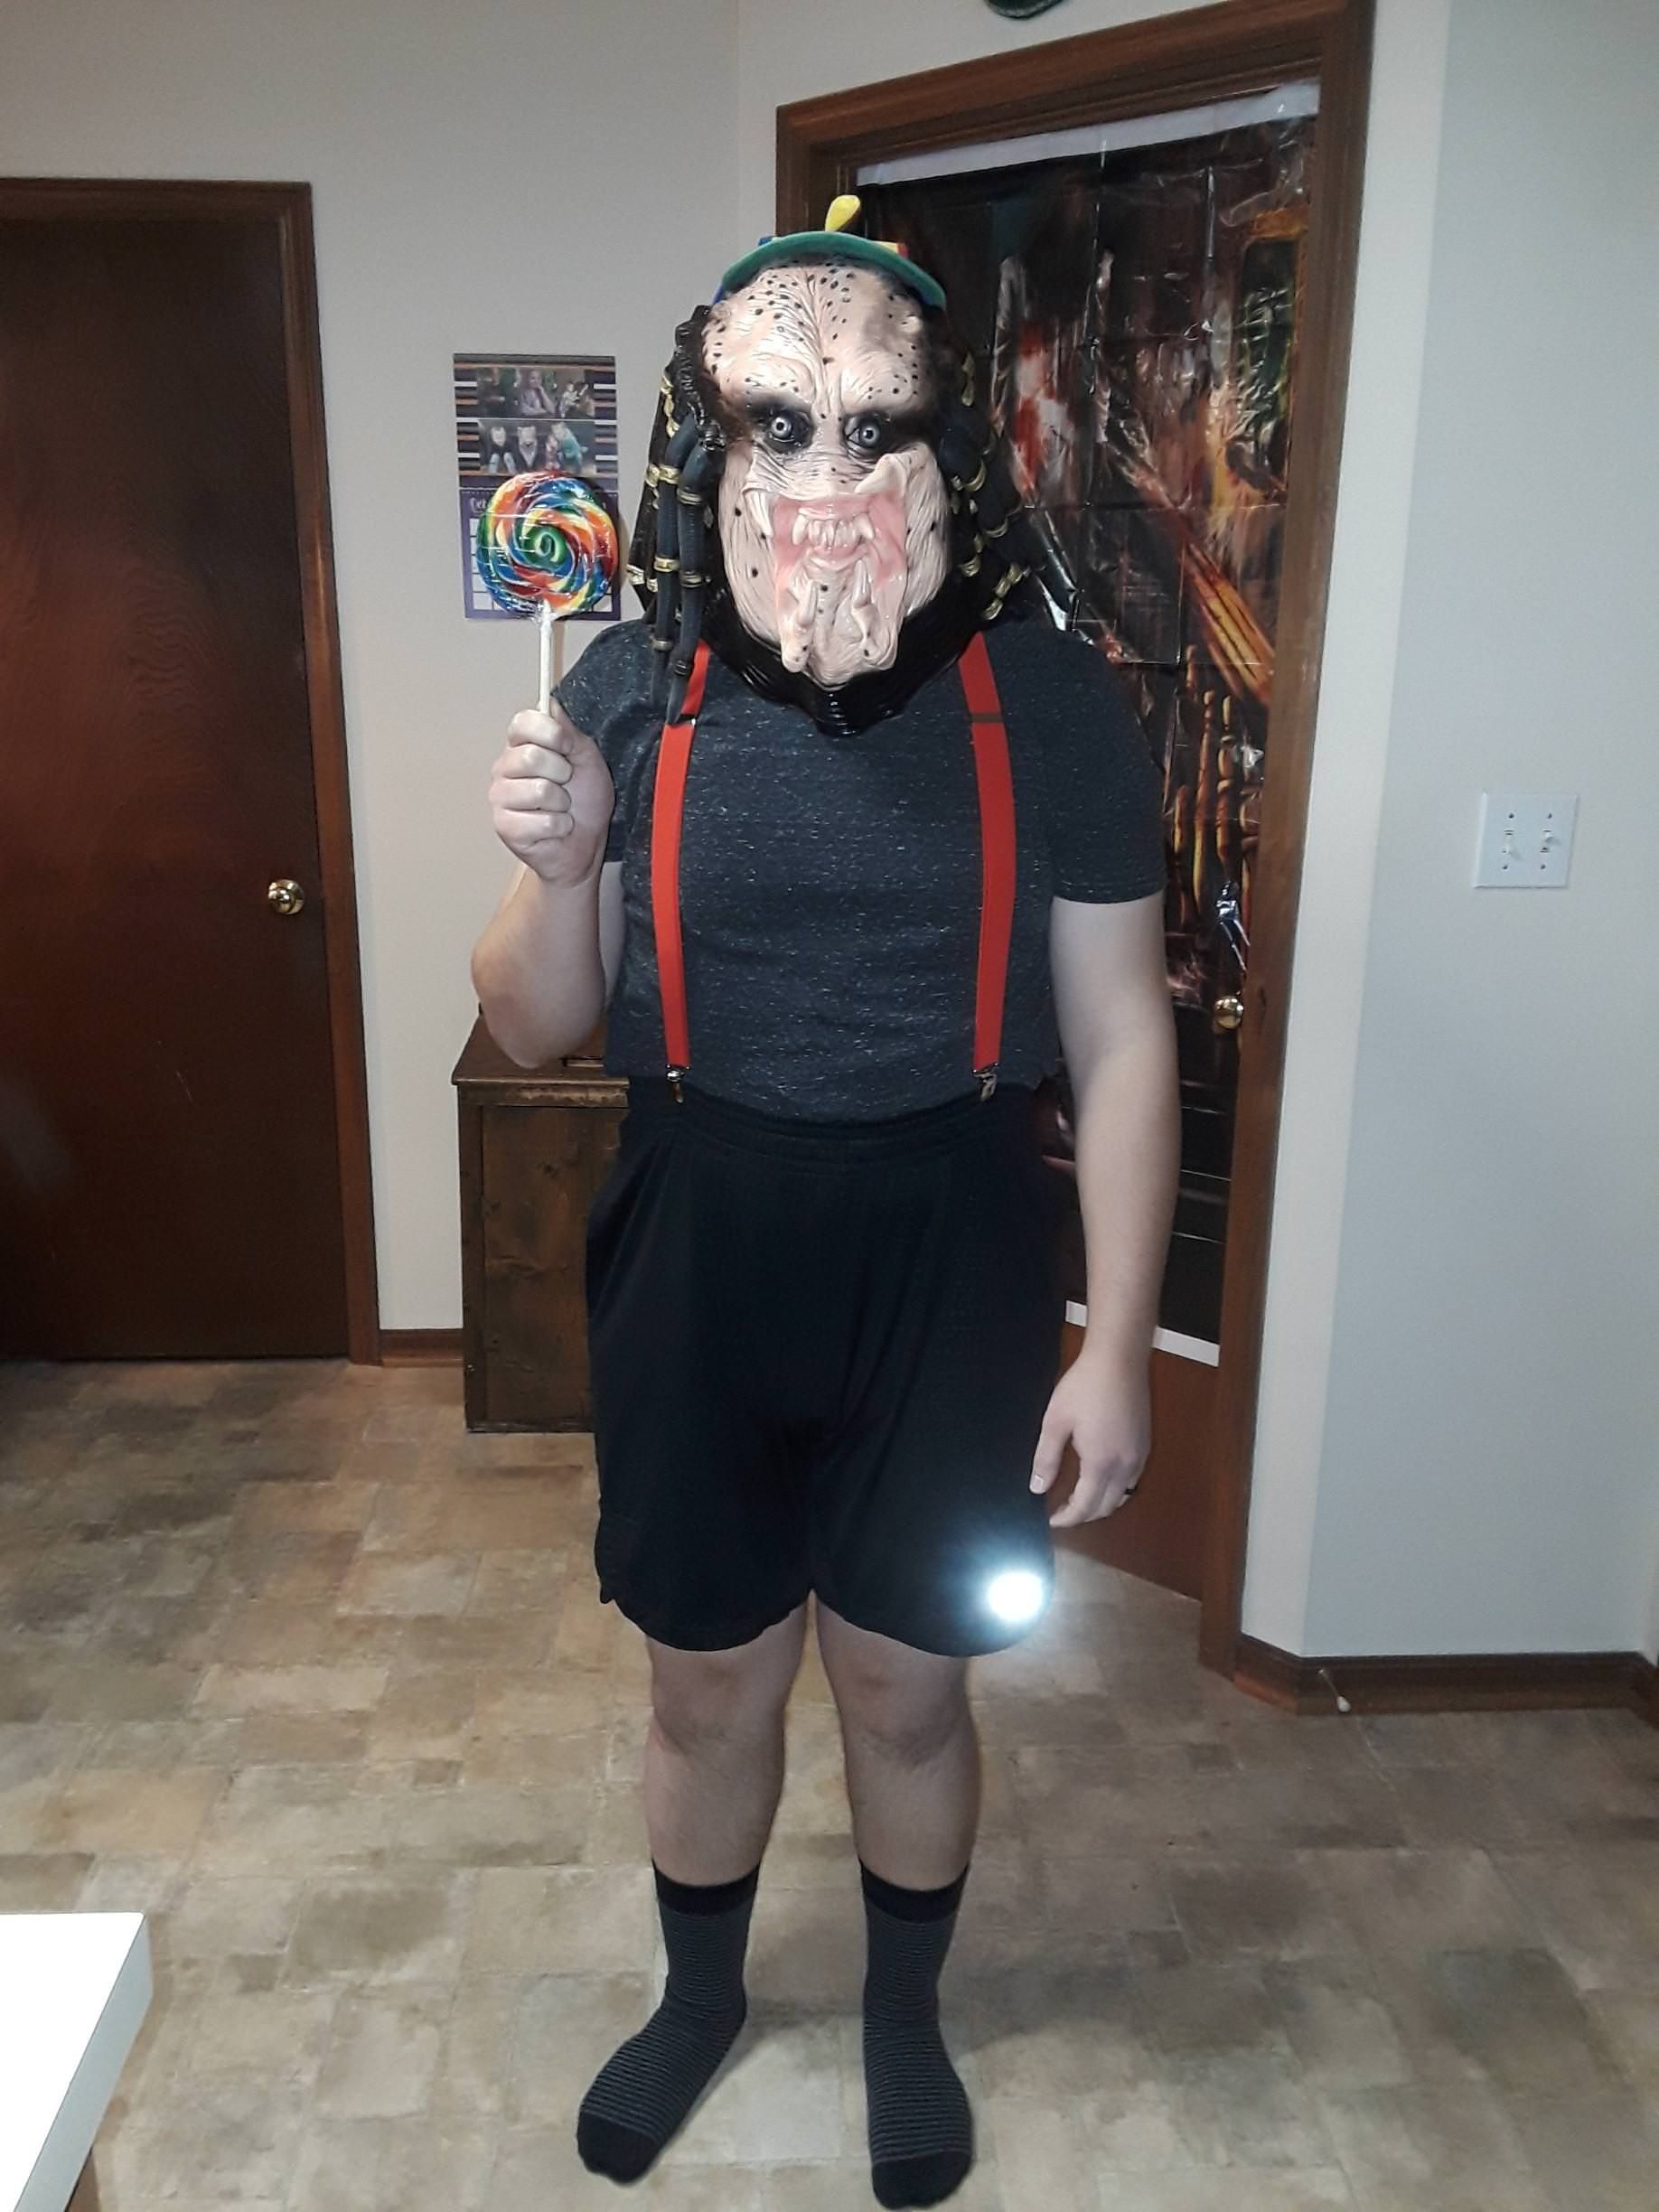 Dressed up as a child predator for a Halloween party